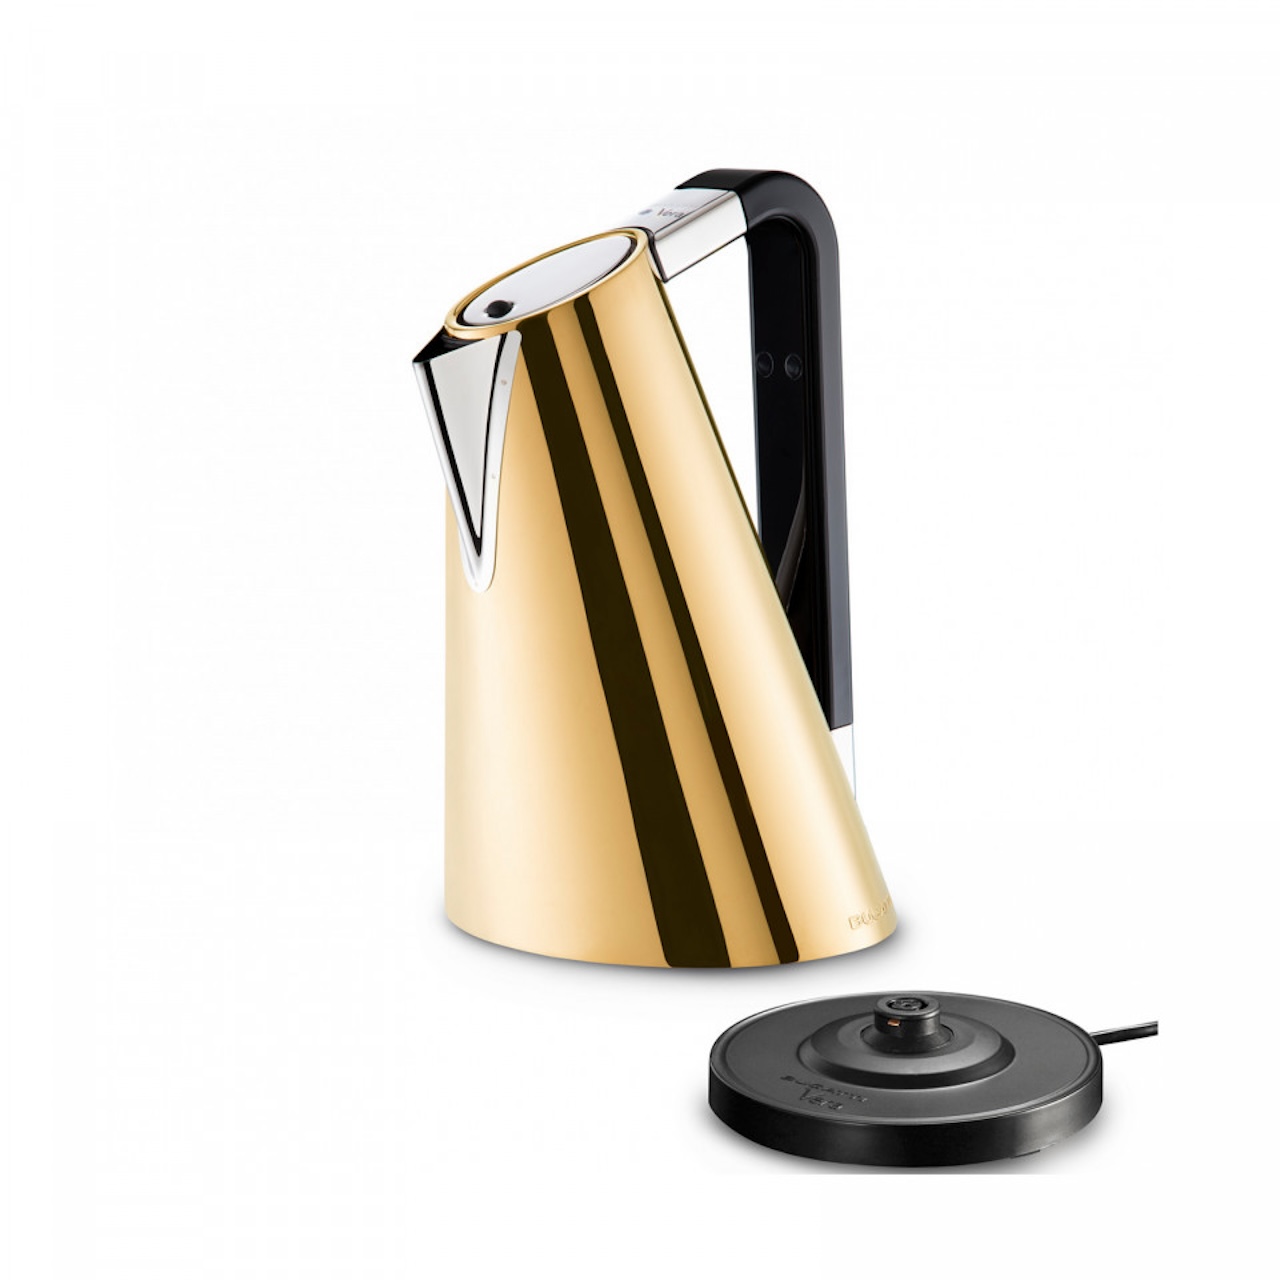 Oster 2097736 Electric Kettle Metropolitan Collection with Rose Gold Accents